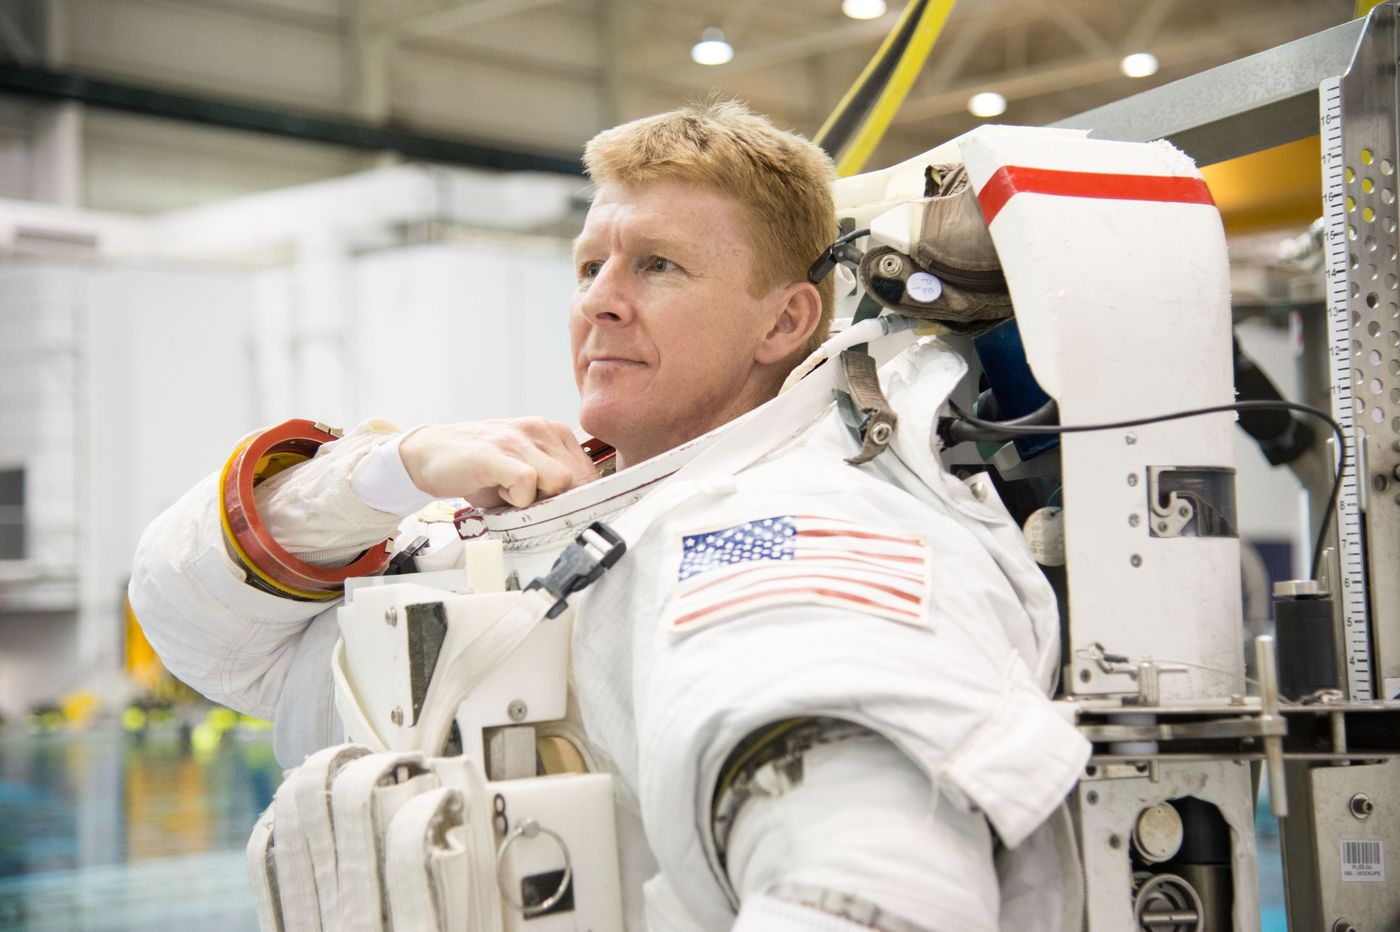 Tim Peake will be performing a spacewalk this month to make a repair.